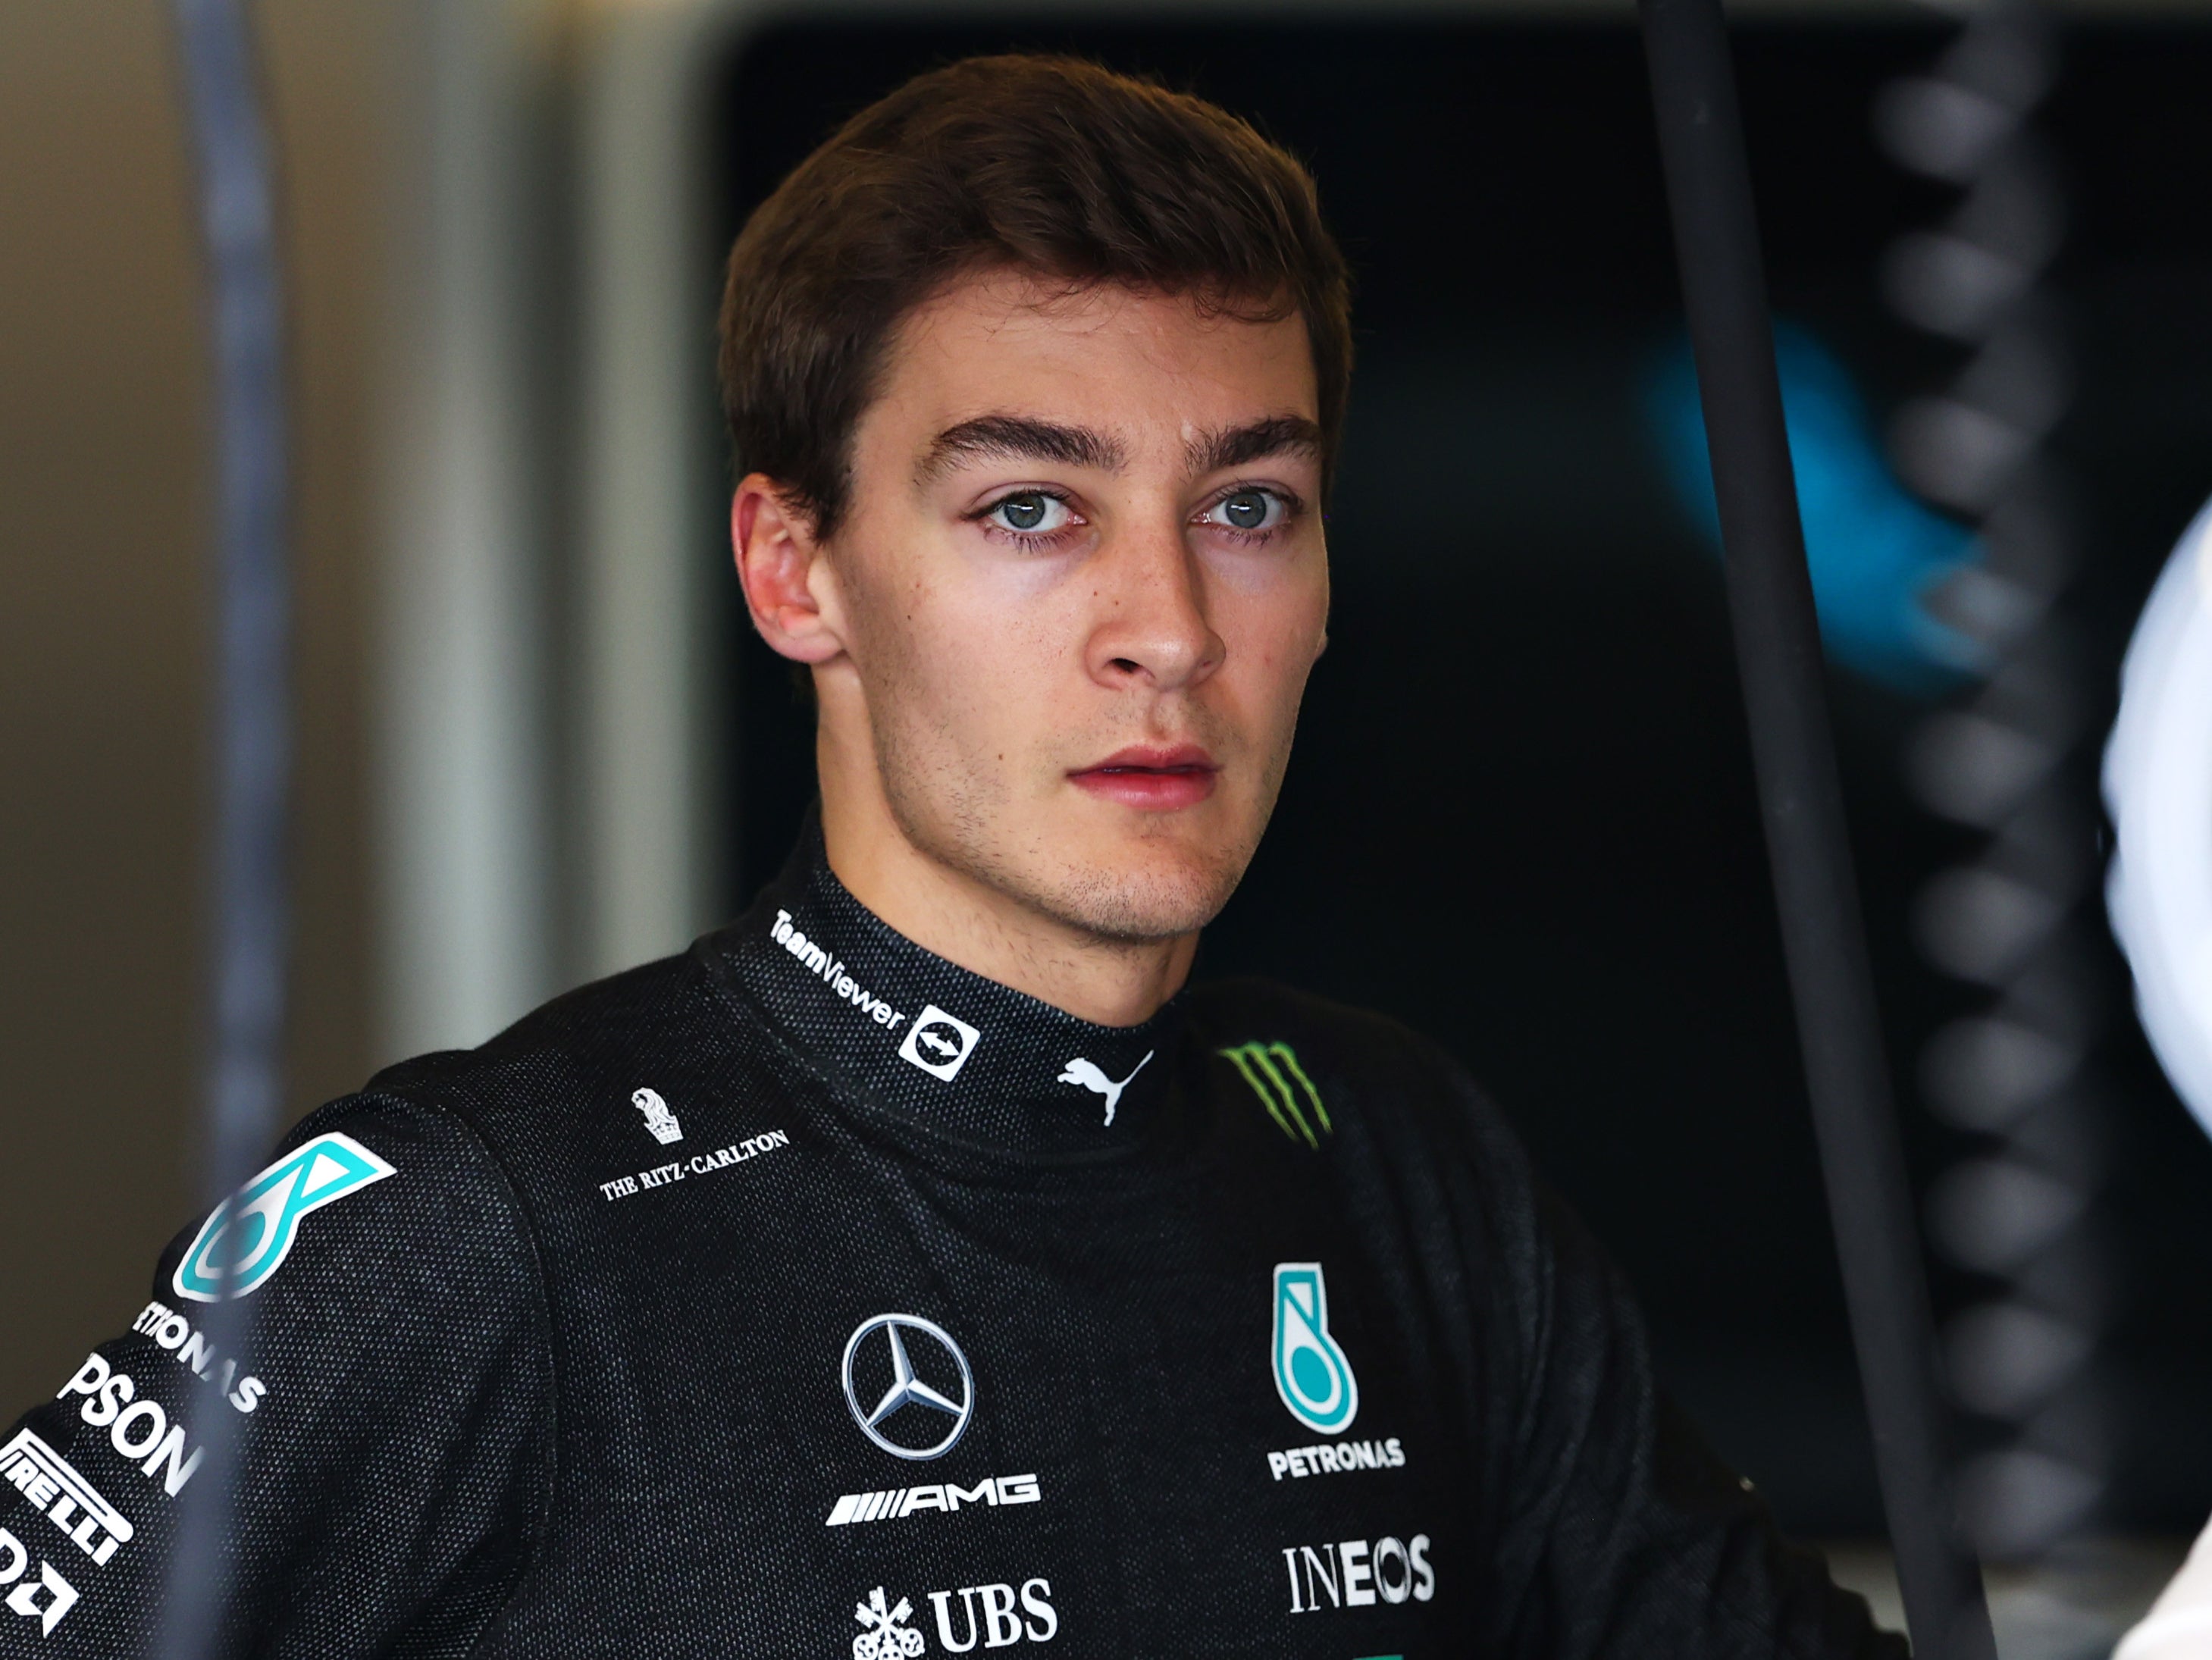 George Russell has moved to Mercedes from Williams